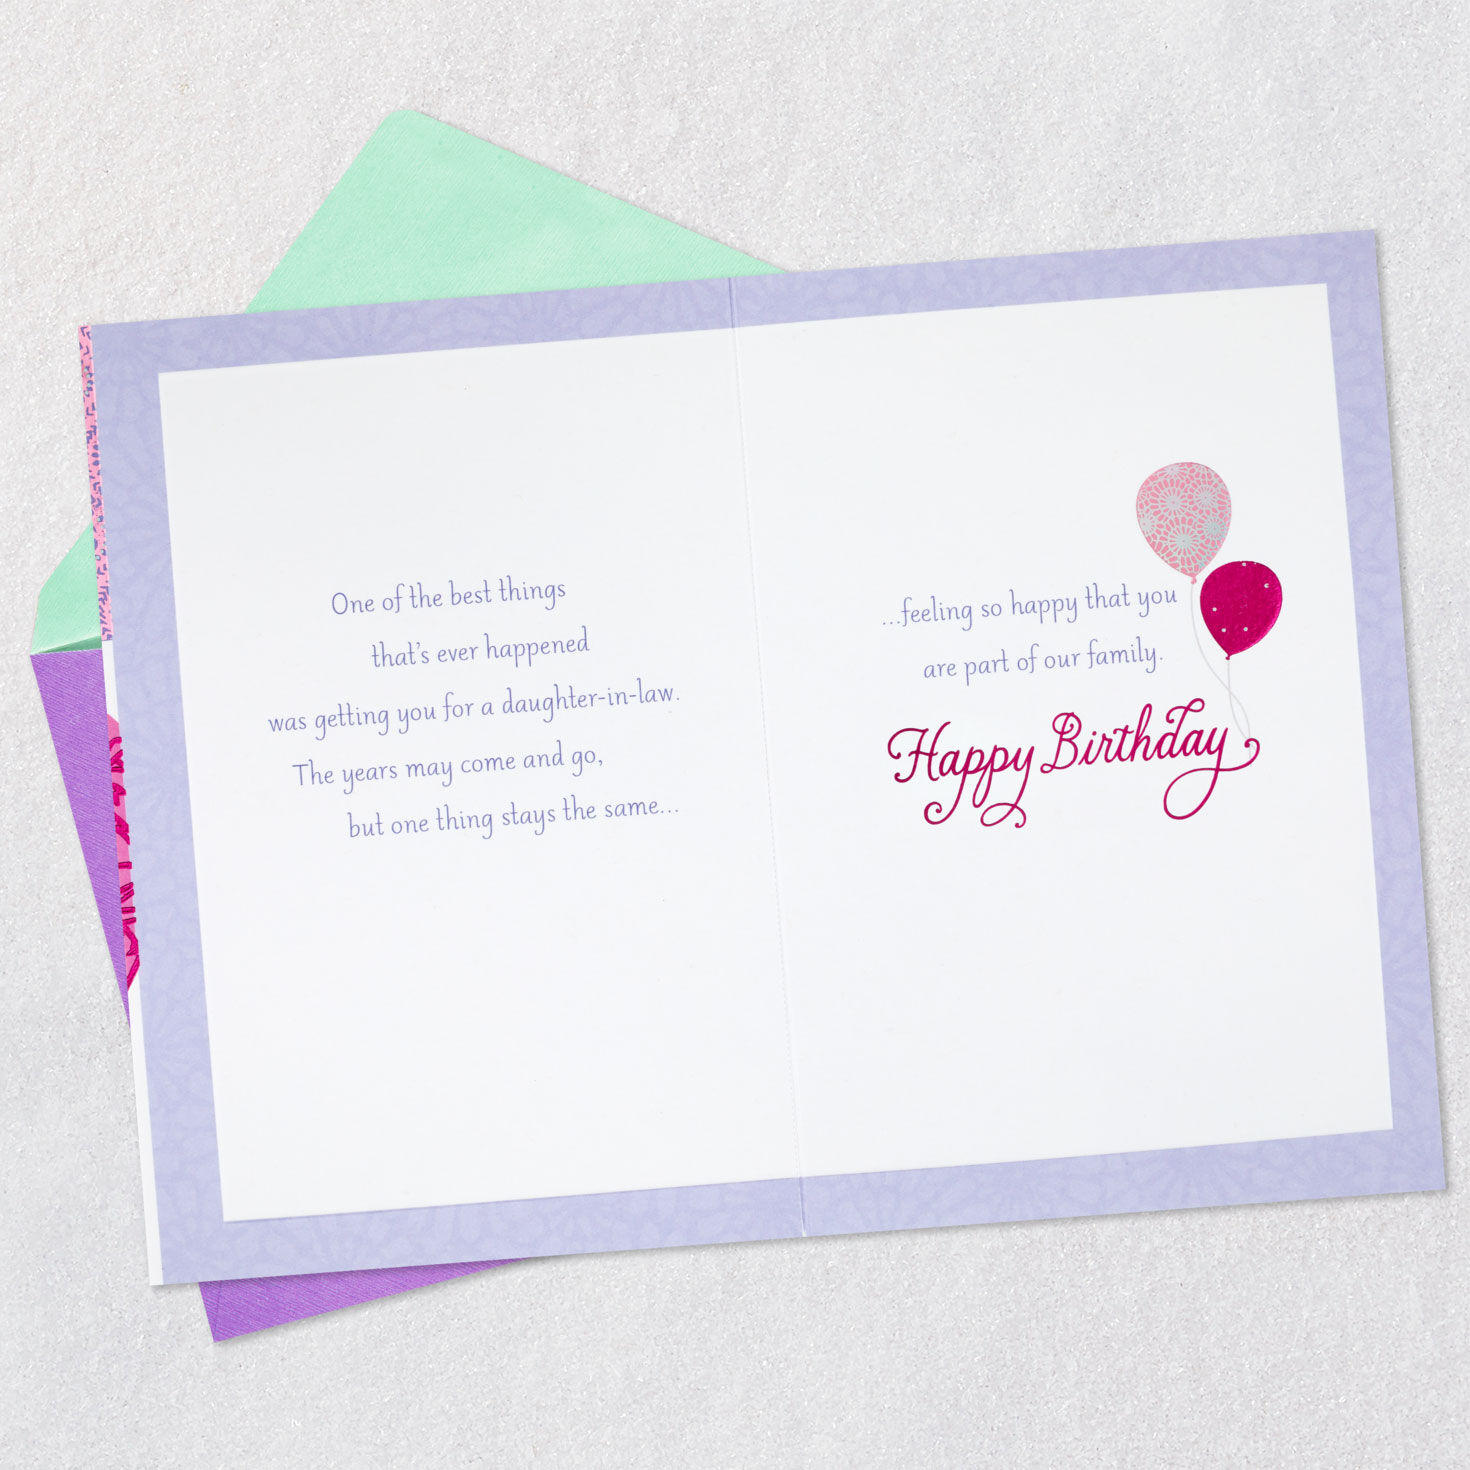 Happy You're Family Birthday Card for Daughter-in-Law for only USD 5.59 | Hallmark